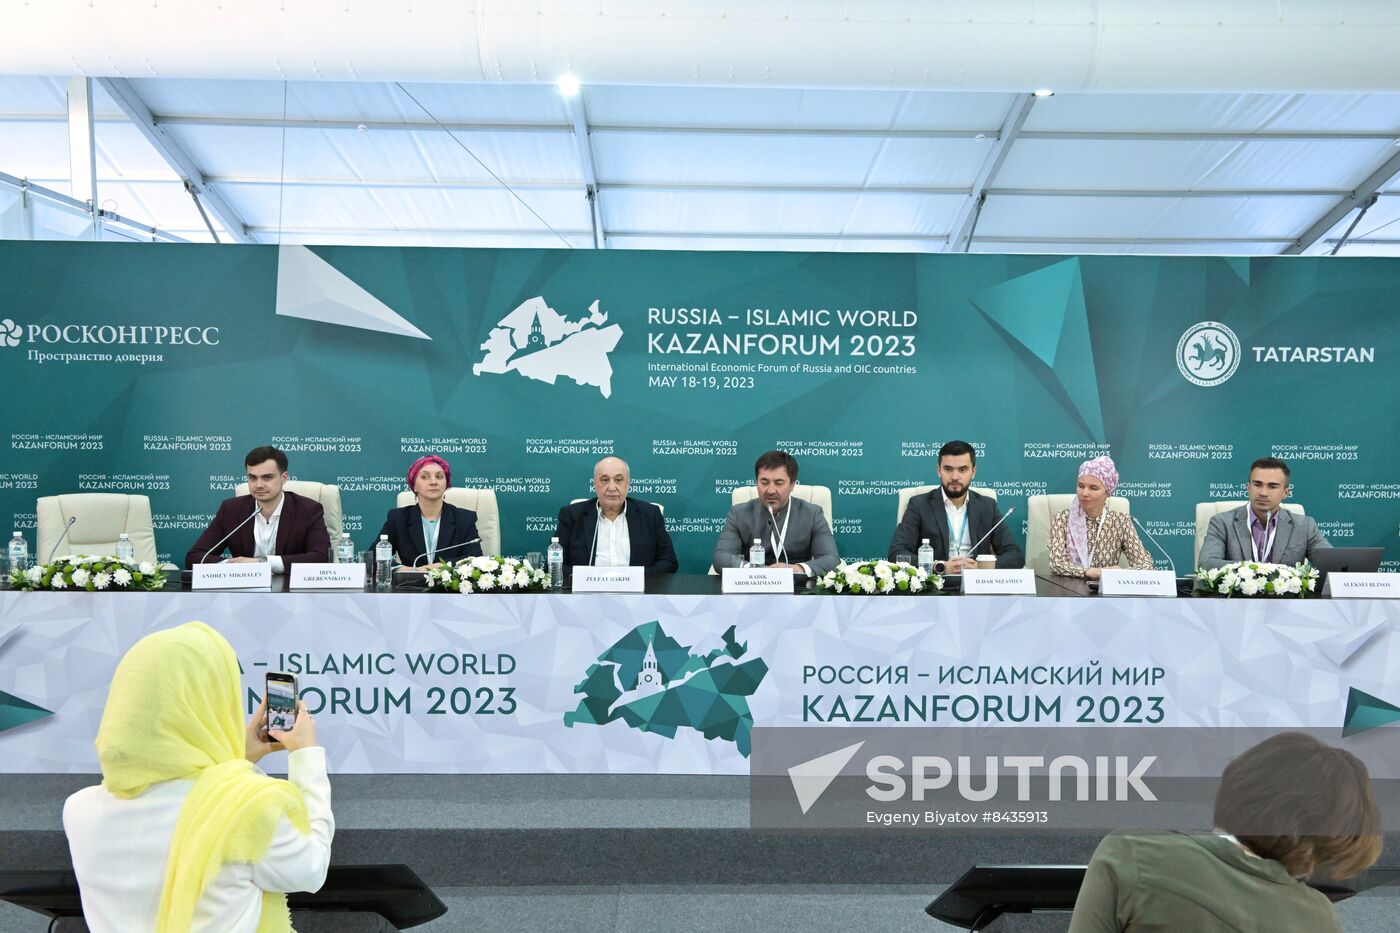 KAZANFORUM 2023. Press conference on the promotion of national heroes